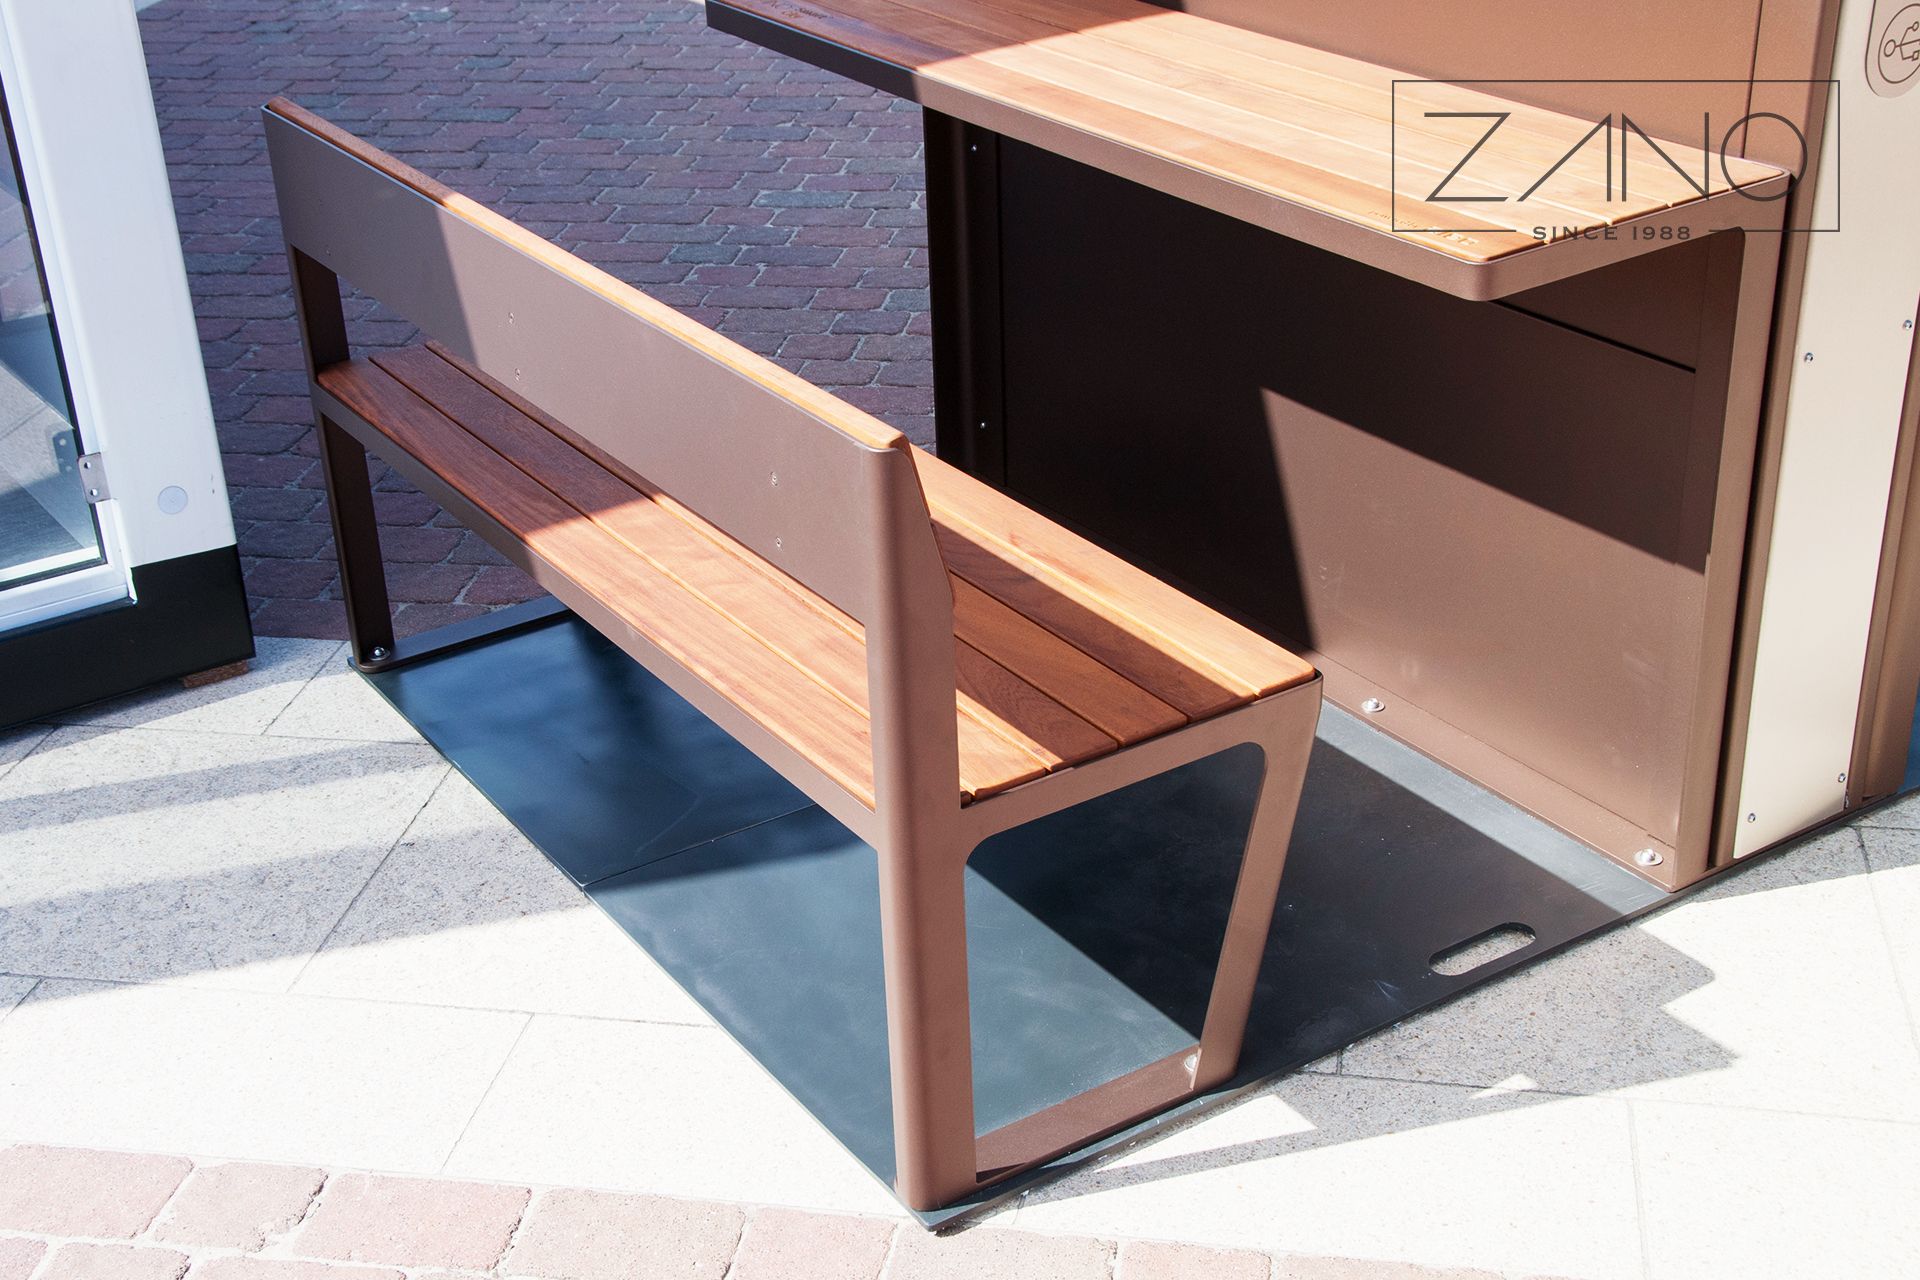 Park bench made by ZANO Street Furniture manufacture